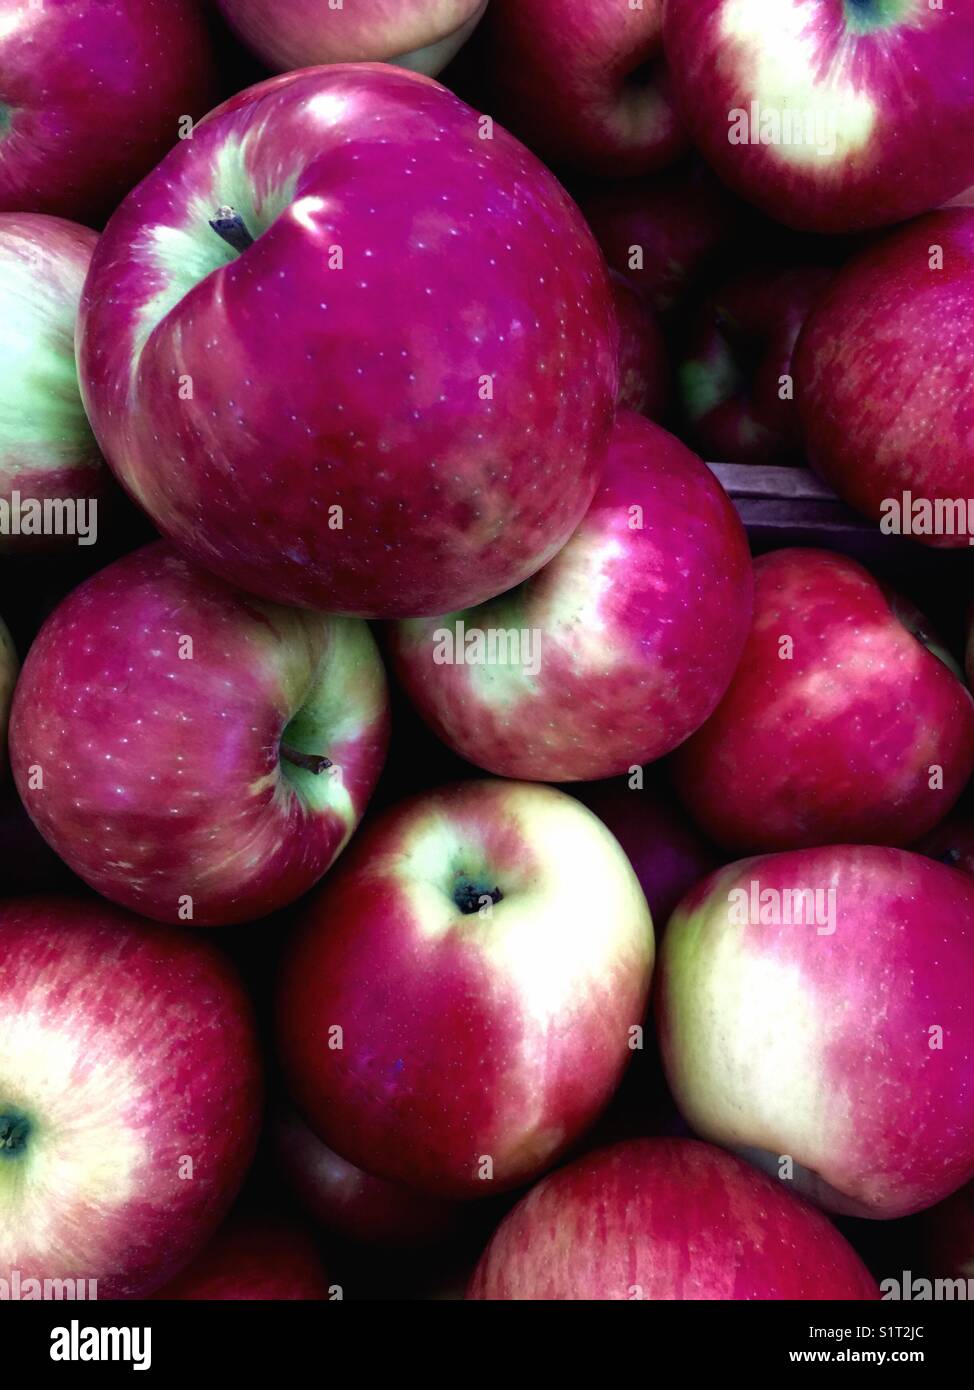 New York State Honey Crisp Apples at Market, Famously Sweet, Large, Red and Green Crisp Apples Stock Photo